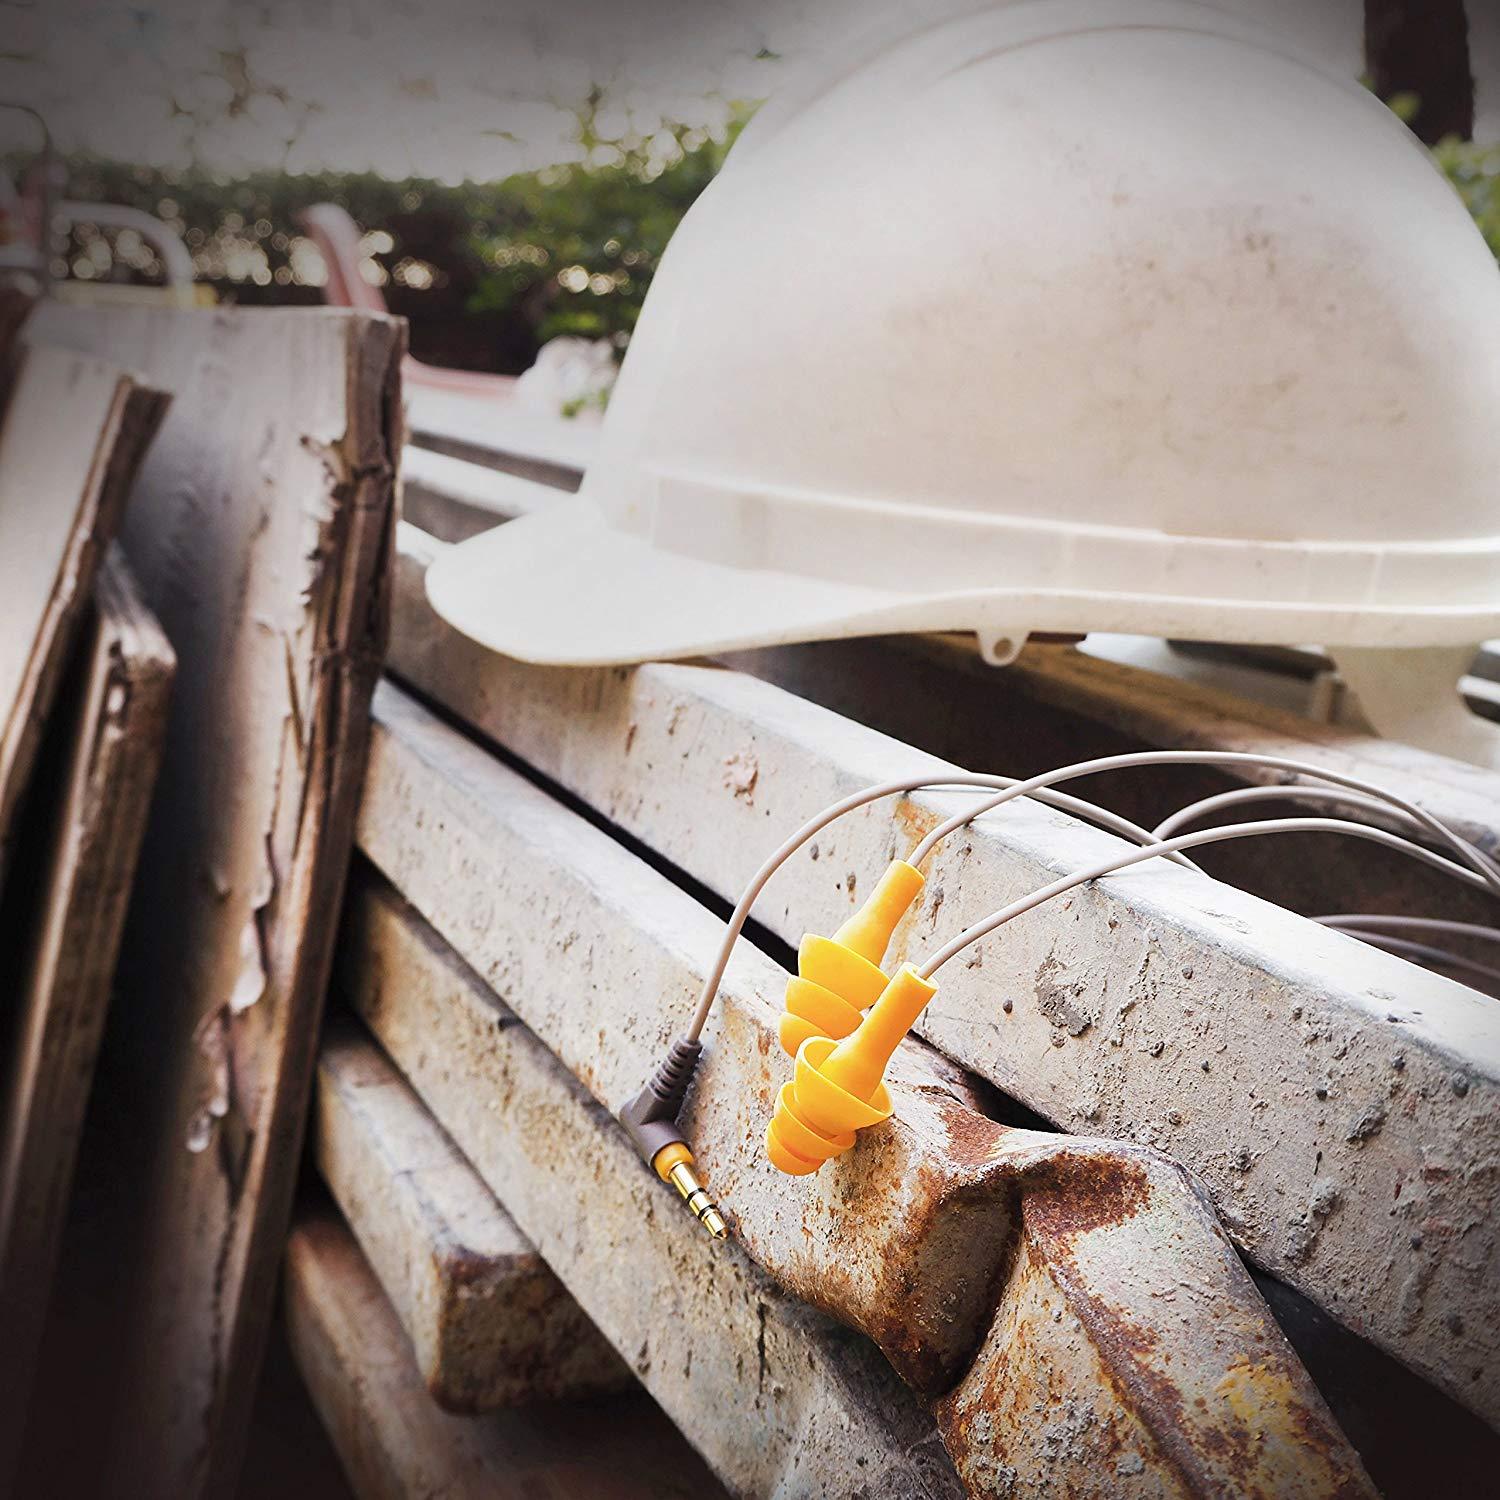 An image of the Elgin Ruckus Earplug Earphone laying on a pile of lumber next to a construction hat at a worksite.